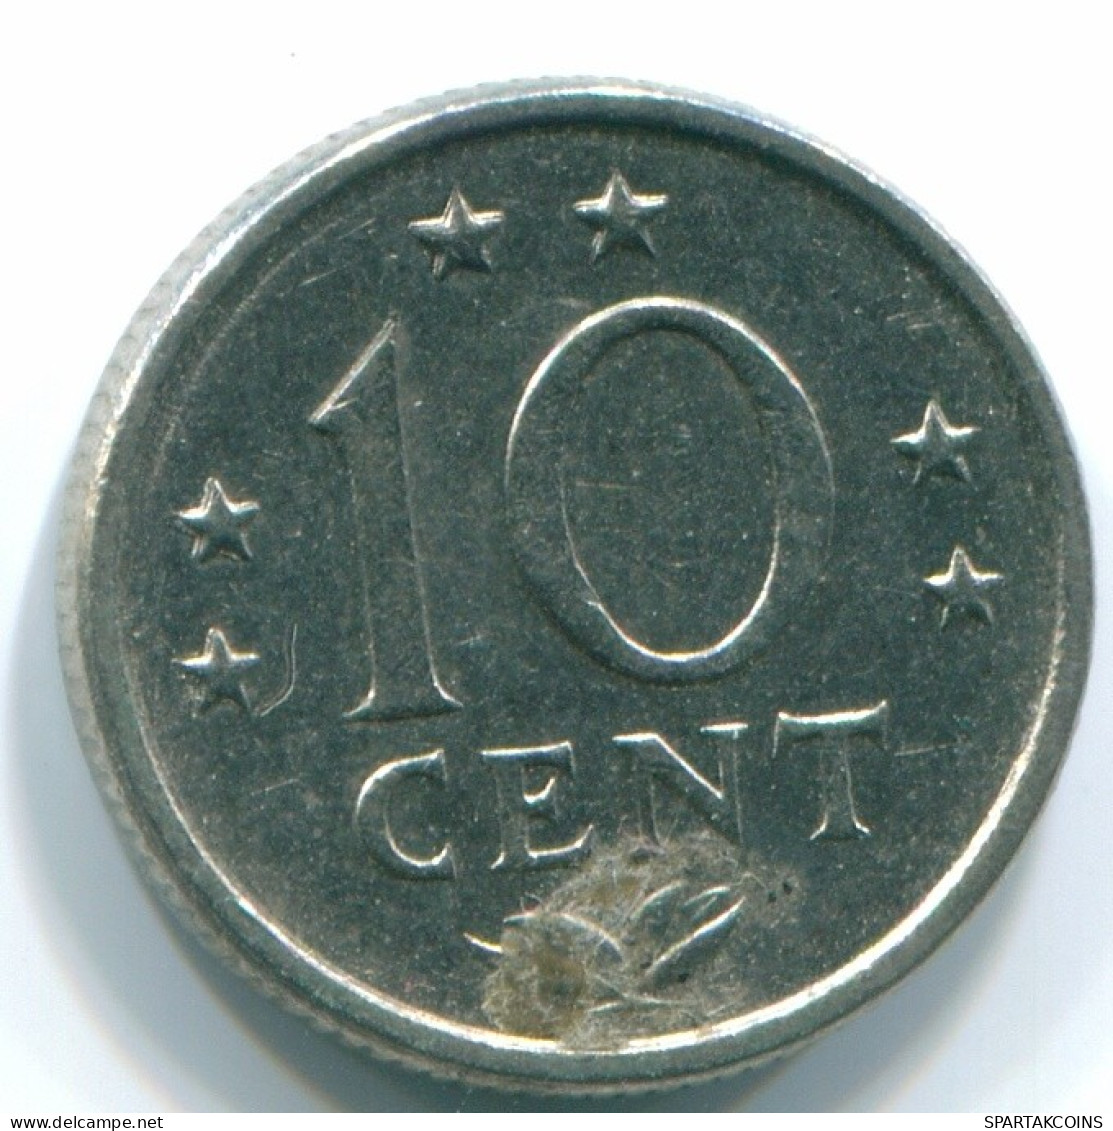 10 CENTS 1978 NETHERLANDS ANTILLES Nickel Colonial Coin #S13552.U.A - Netherlands Antilles